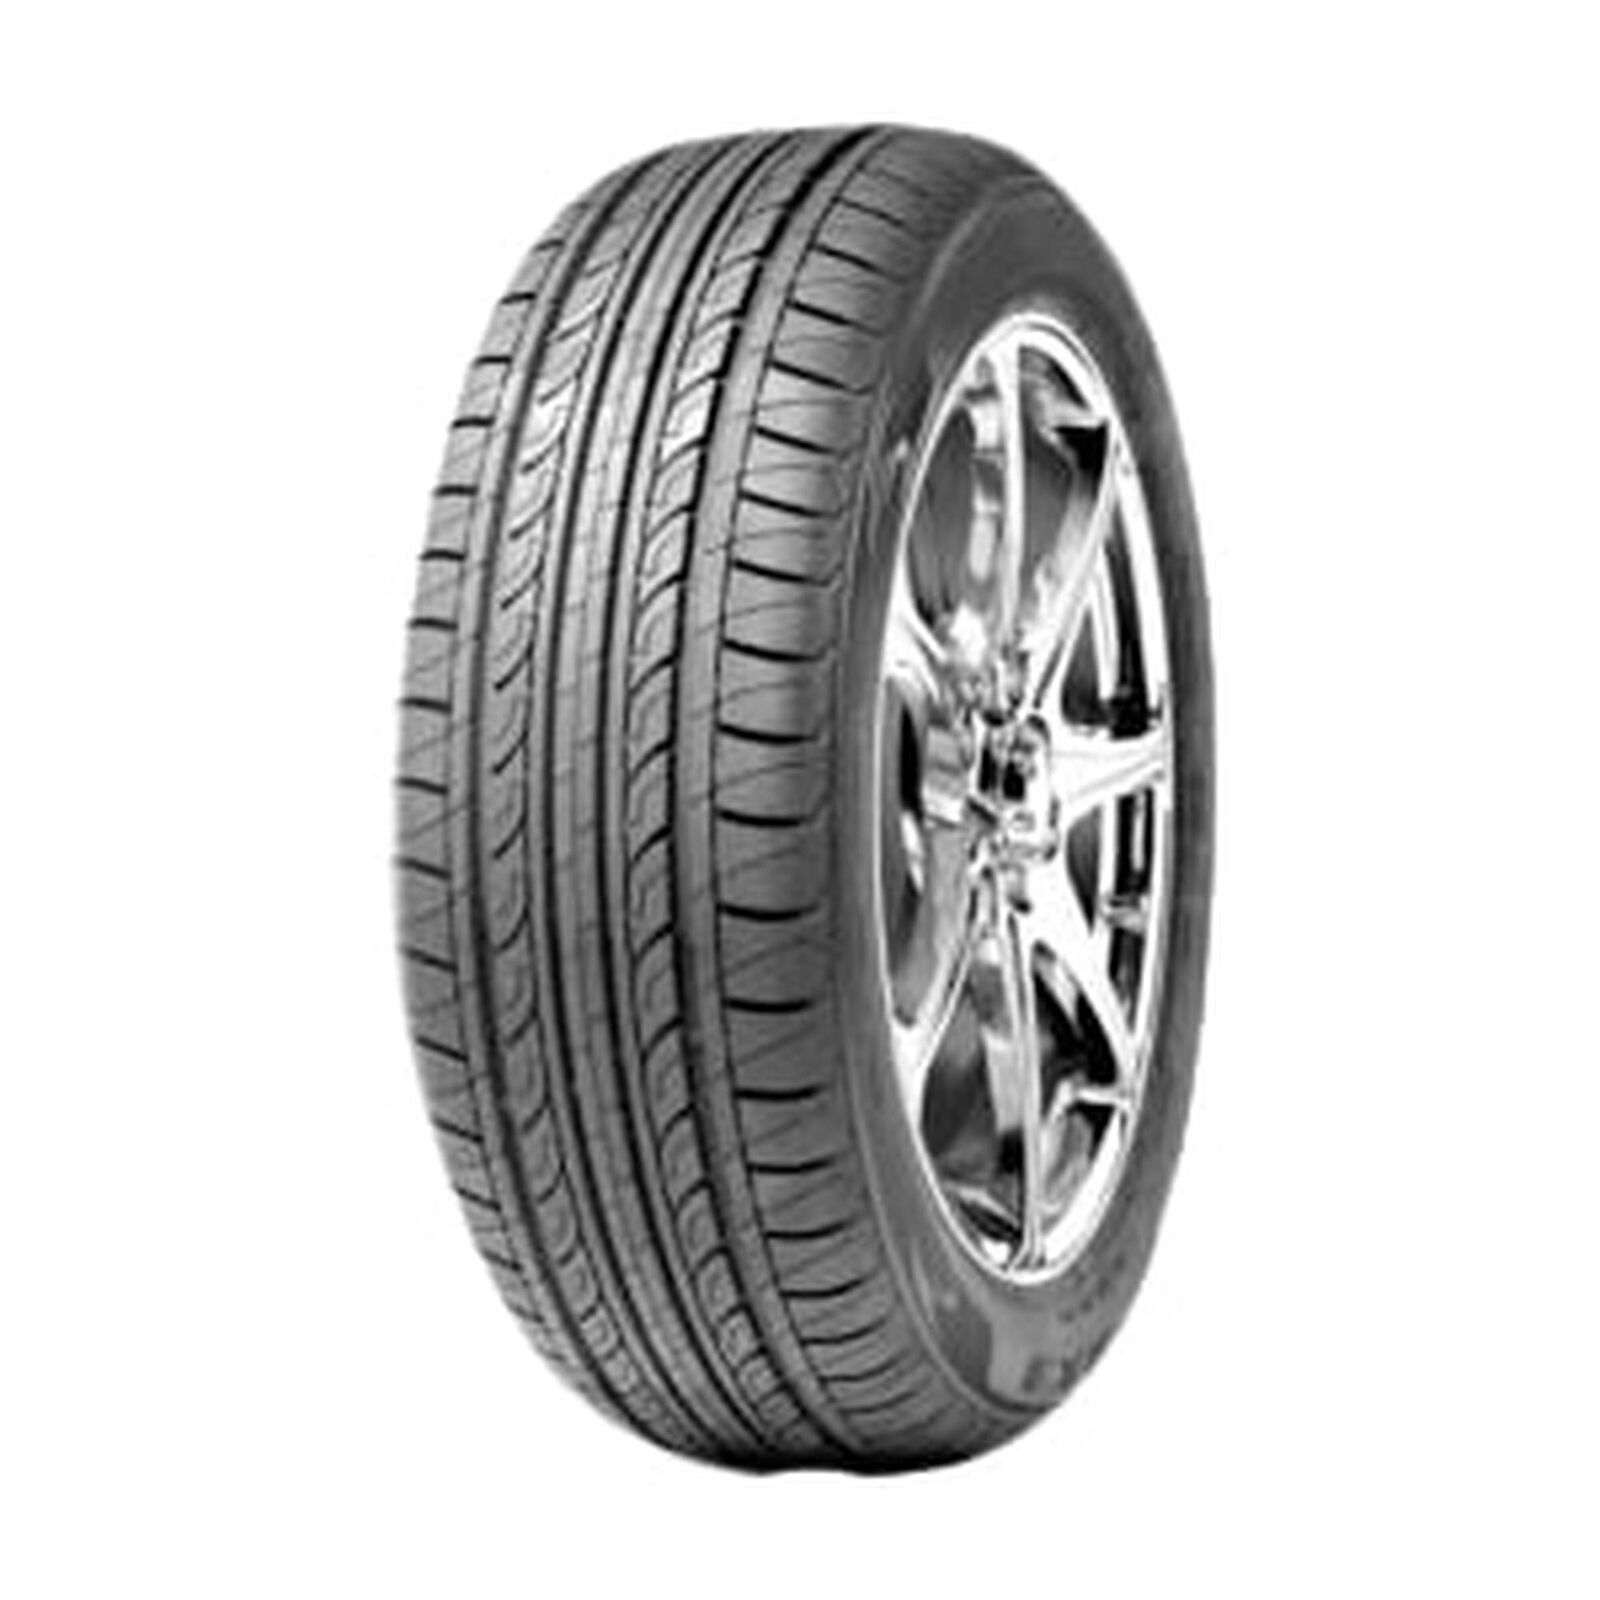 1 New Ardent Hp Rx3  - P185/65r15 Tires 1856515 185 65 15